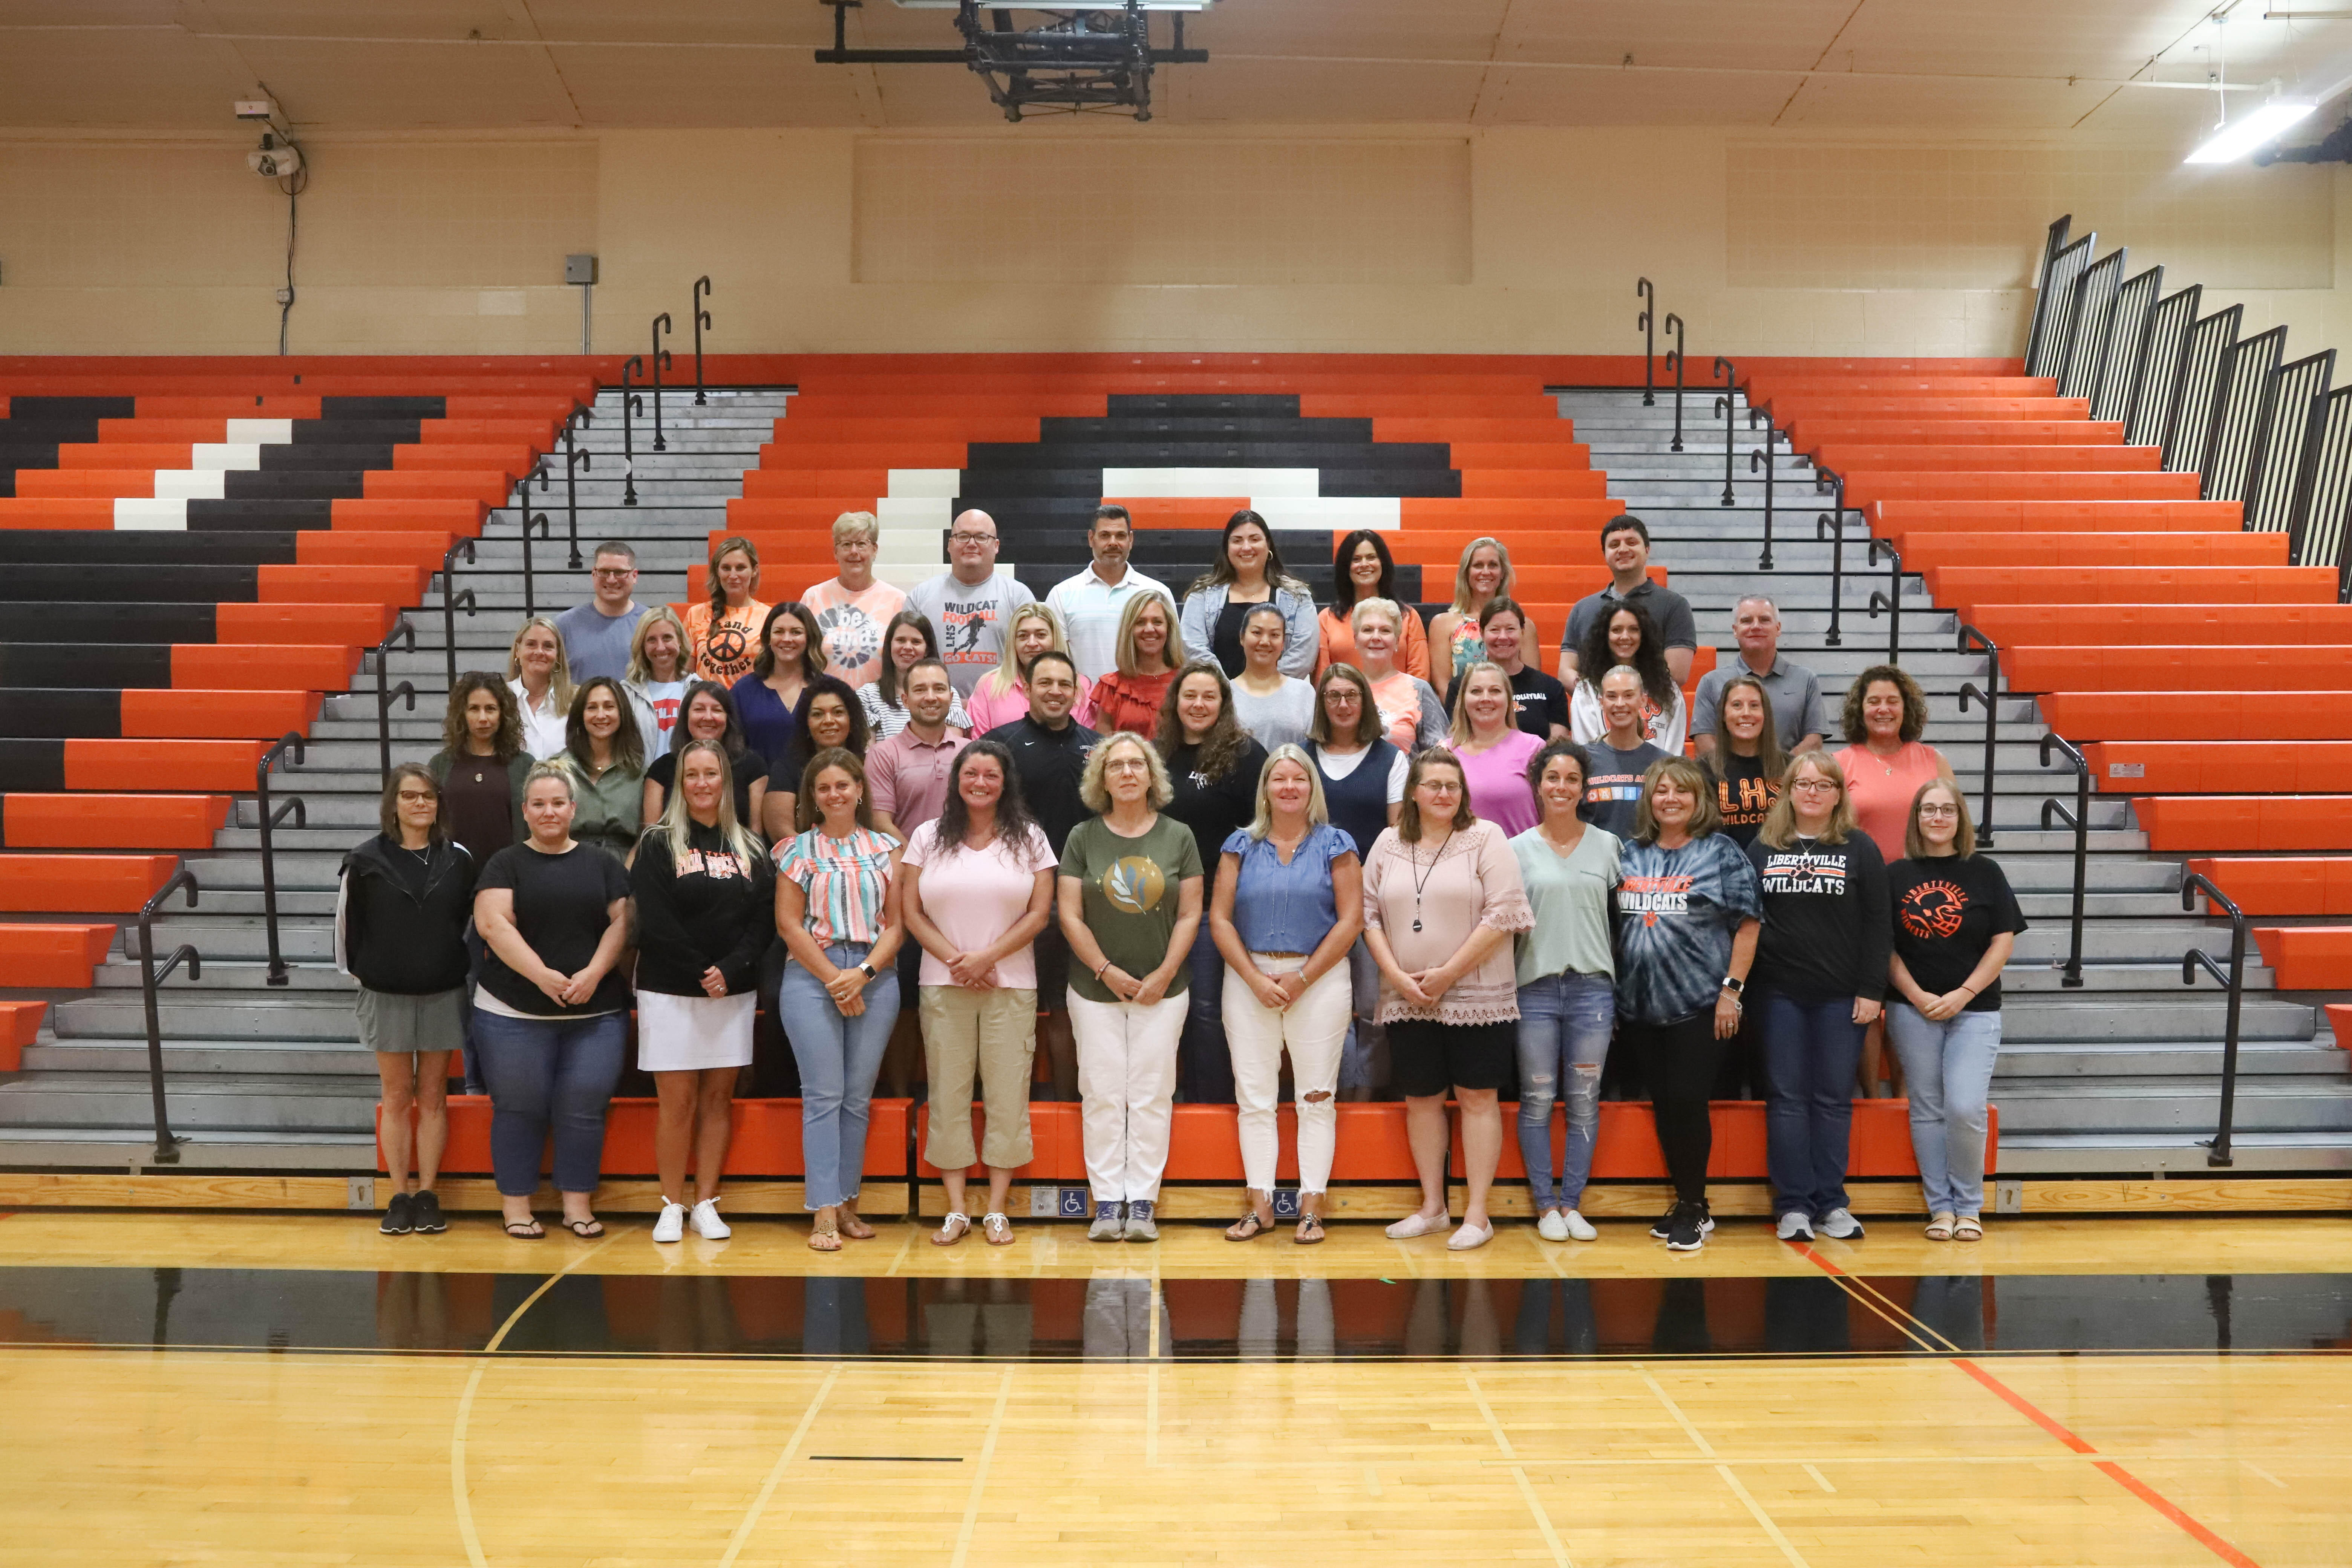 LHS Special Services Department staff